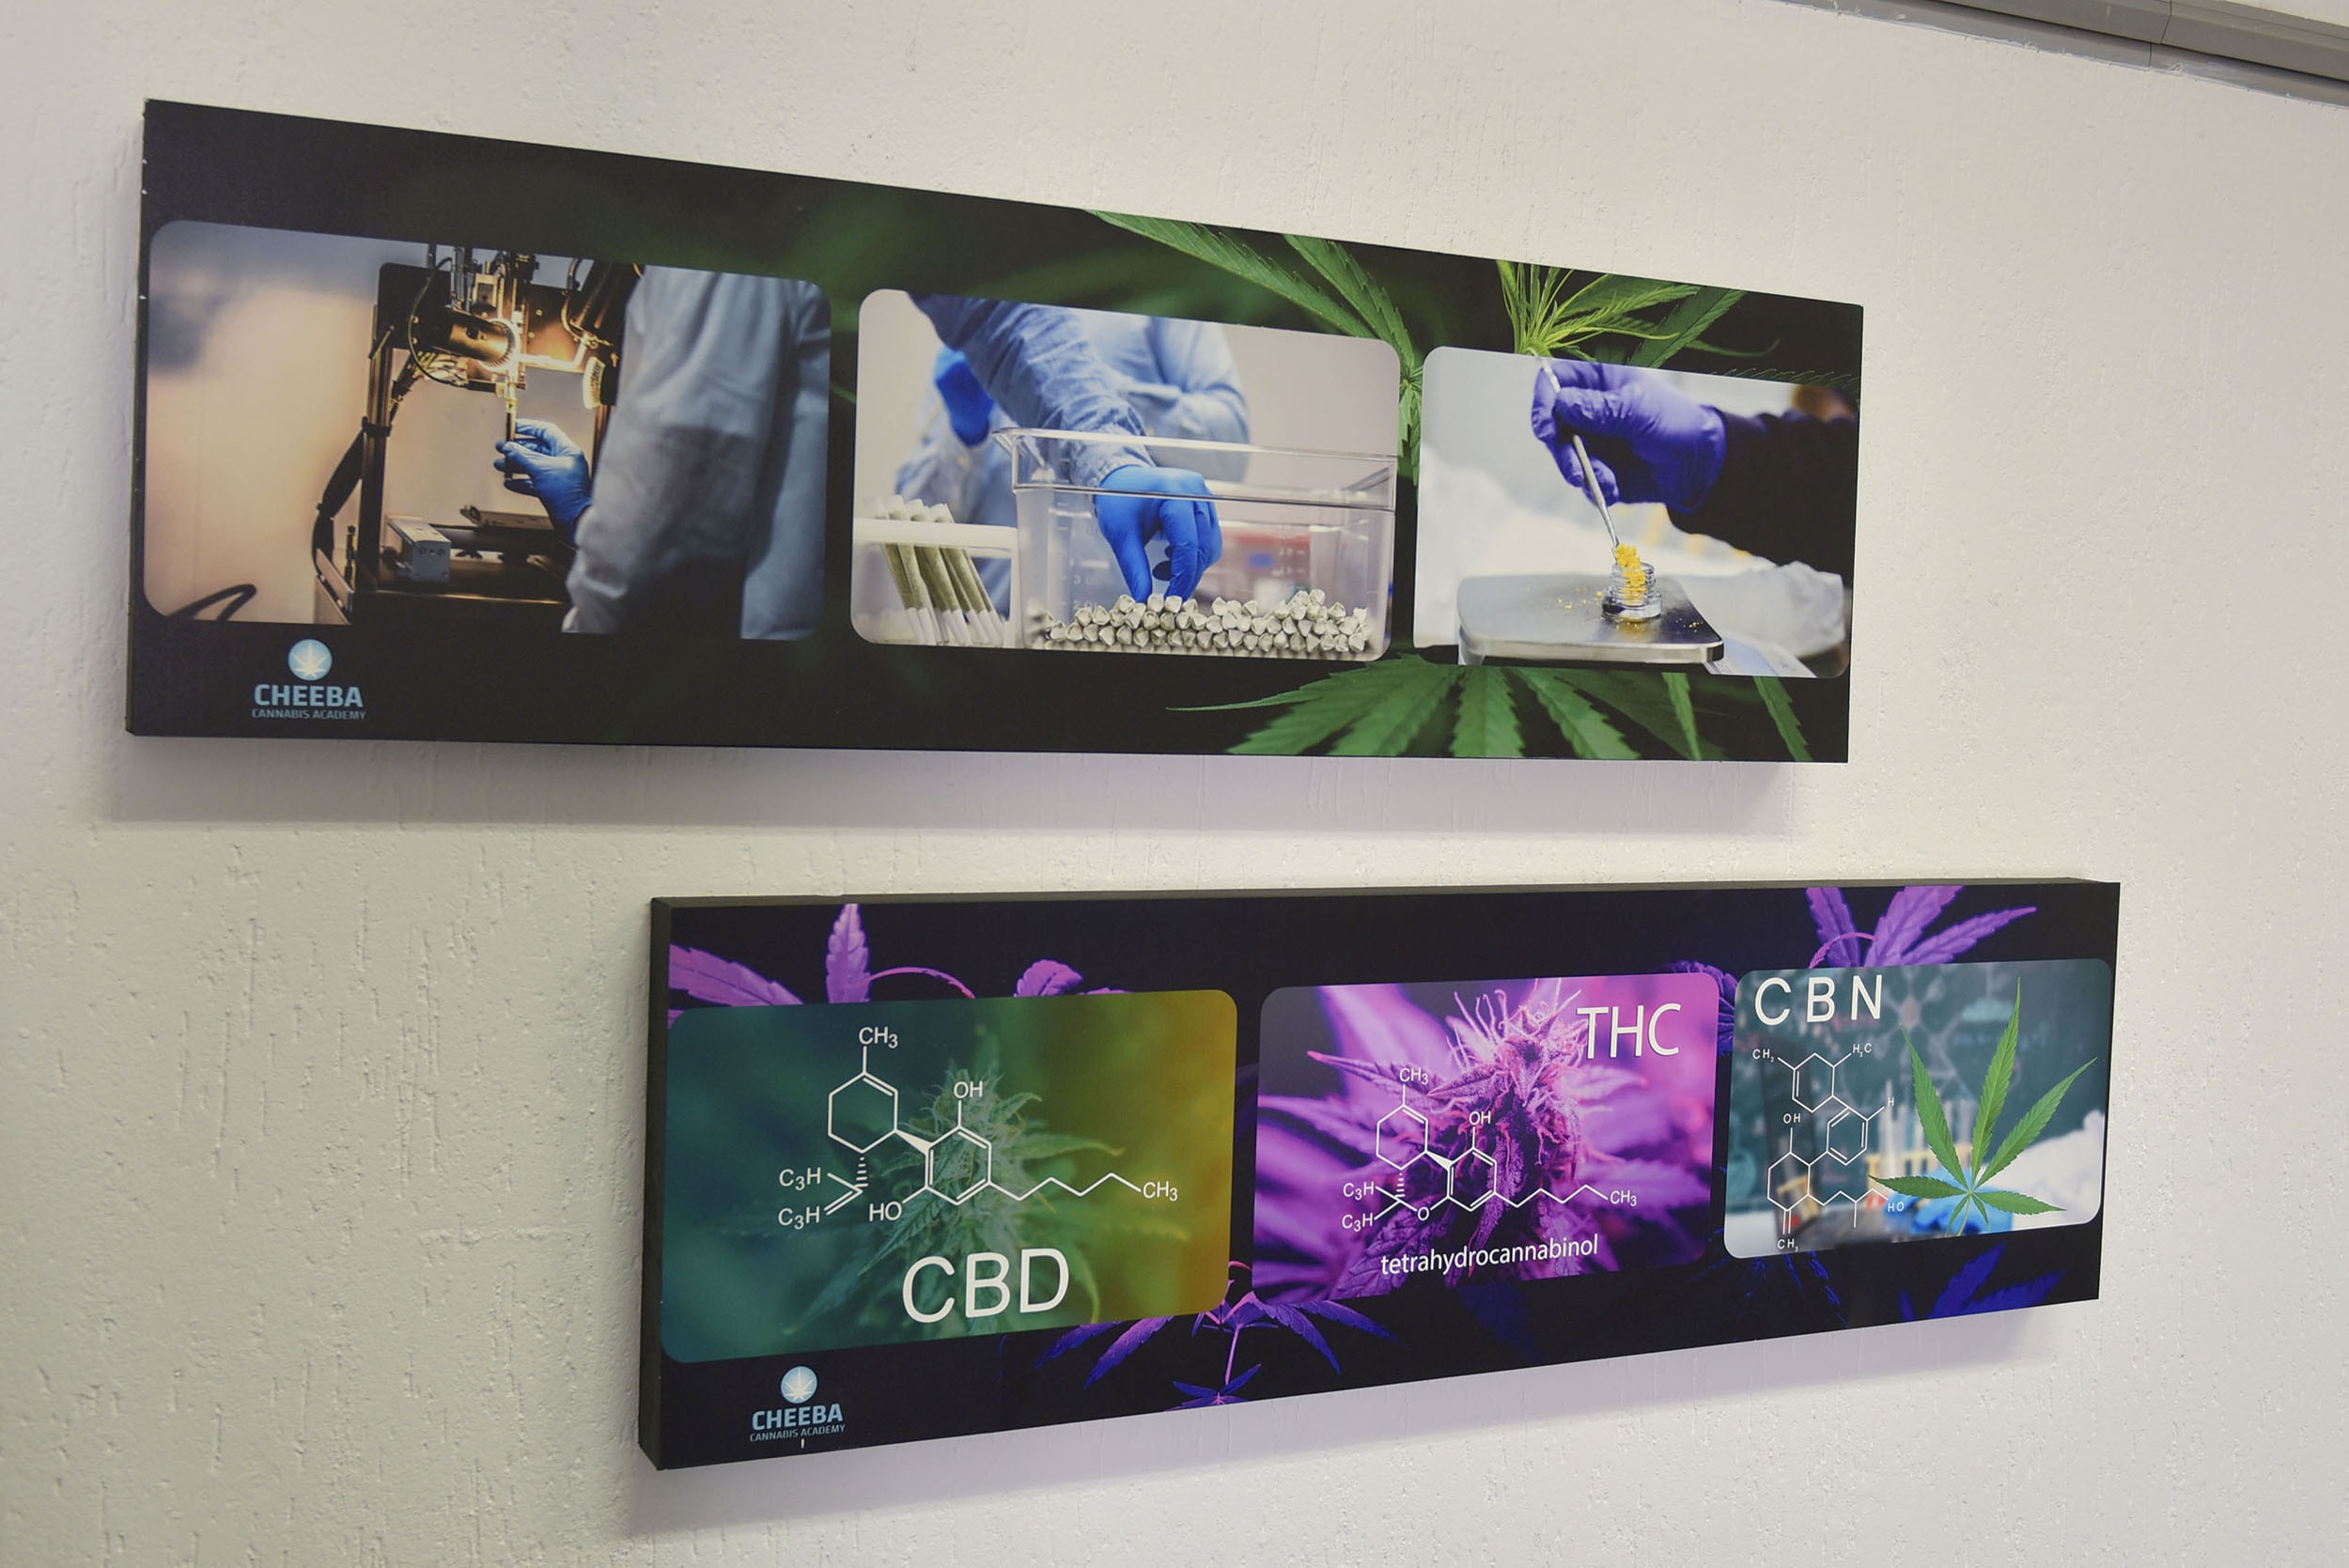 Posters in the training room at the Cheeba Cannabis Academy in Vereeniging. Opening for their first classes soon, Africas first dedicated Cannabis academy aims to deliver an all rounded education in all things cannabis with the aim to equip people with the knowledge needed as the Cannabis industry grows in South Africa and worldwide. Picture: Neil McCartneyPosters in the training room at the Cheeba Cannabis Academy in Vereeniging. Opening for their first classes soon, Africas first dedicated Cannabis academy aims to deliver an all rounded education in all things cannabis with the aim to equip people with the knowledge needed as the Cannabis industry grows in South Africa and worldwide. Picture: Neil McCartney